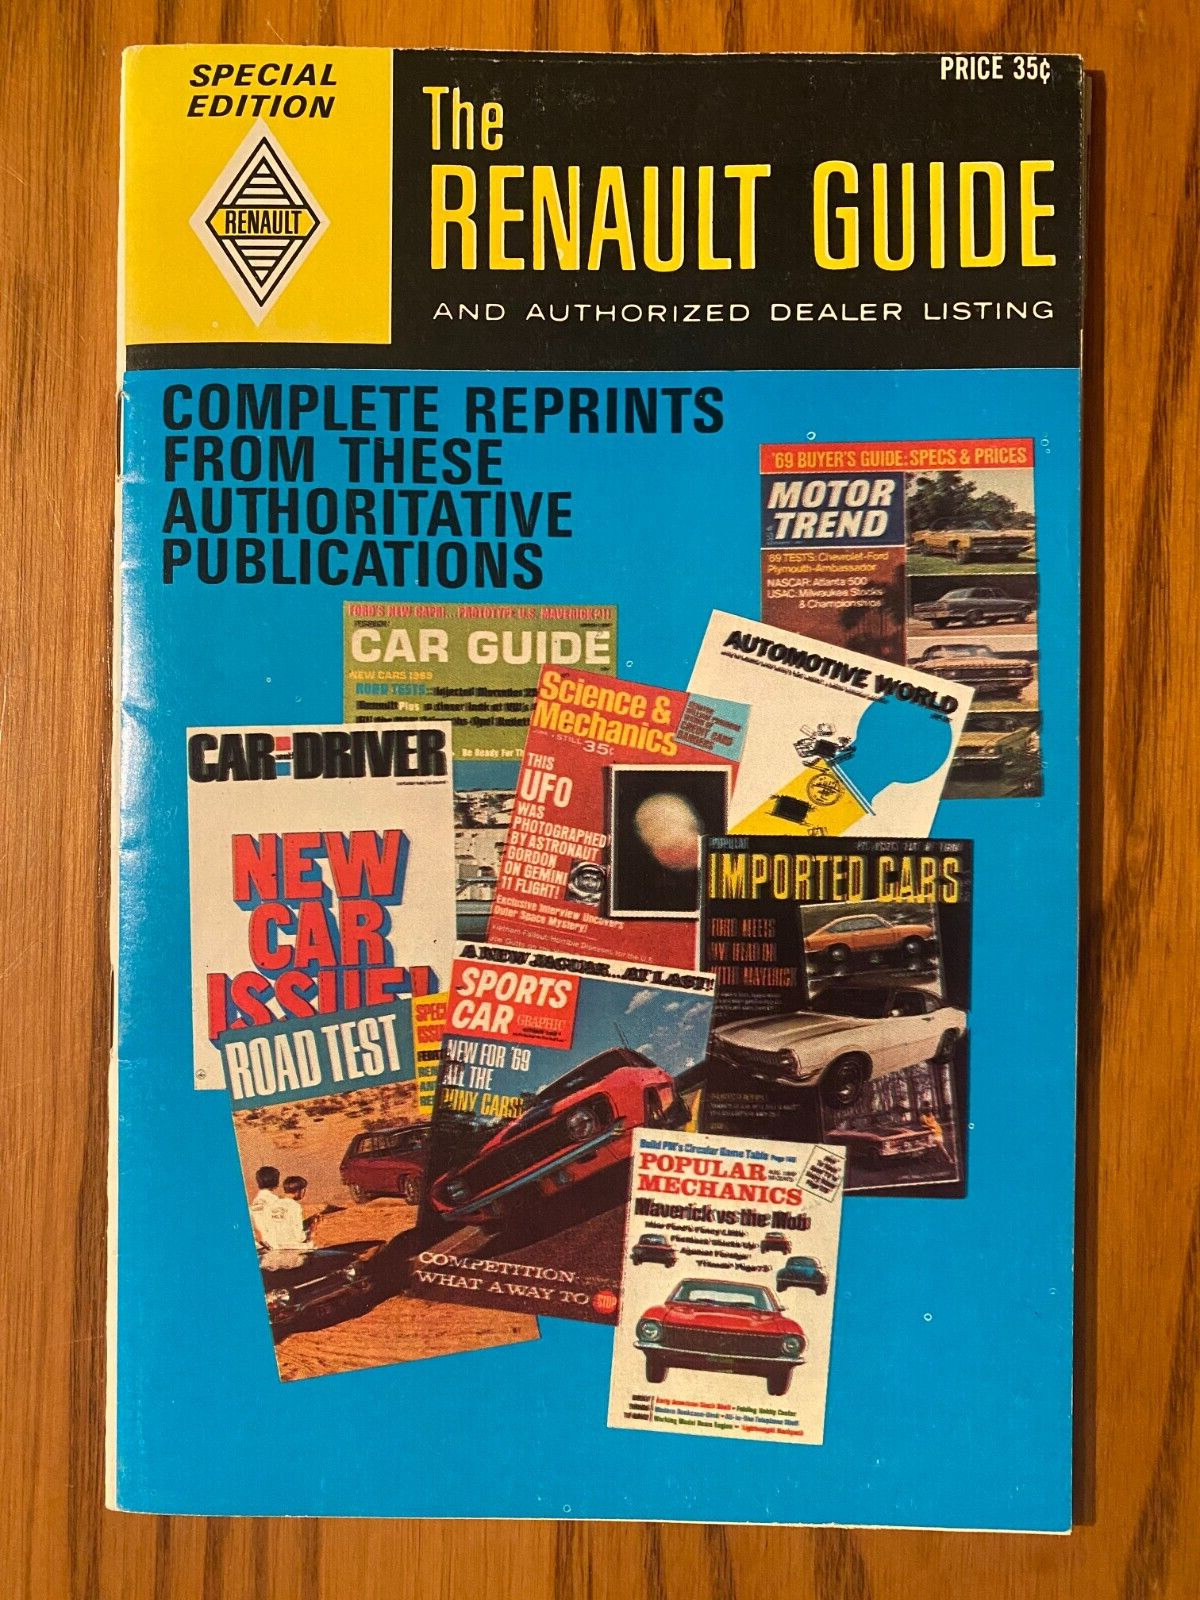 The Renault Guide Special Edition - Reprints 1968 1969 Magazine Tests - Rare US